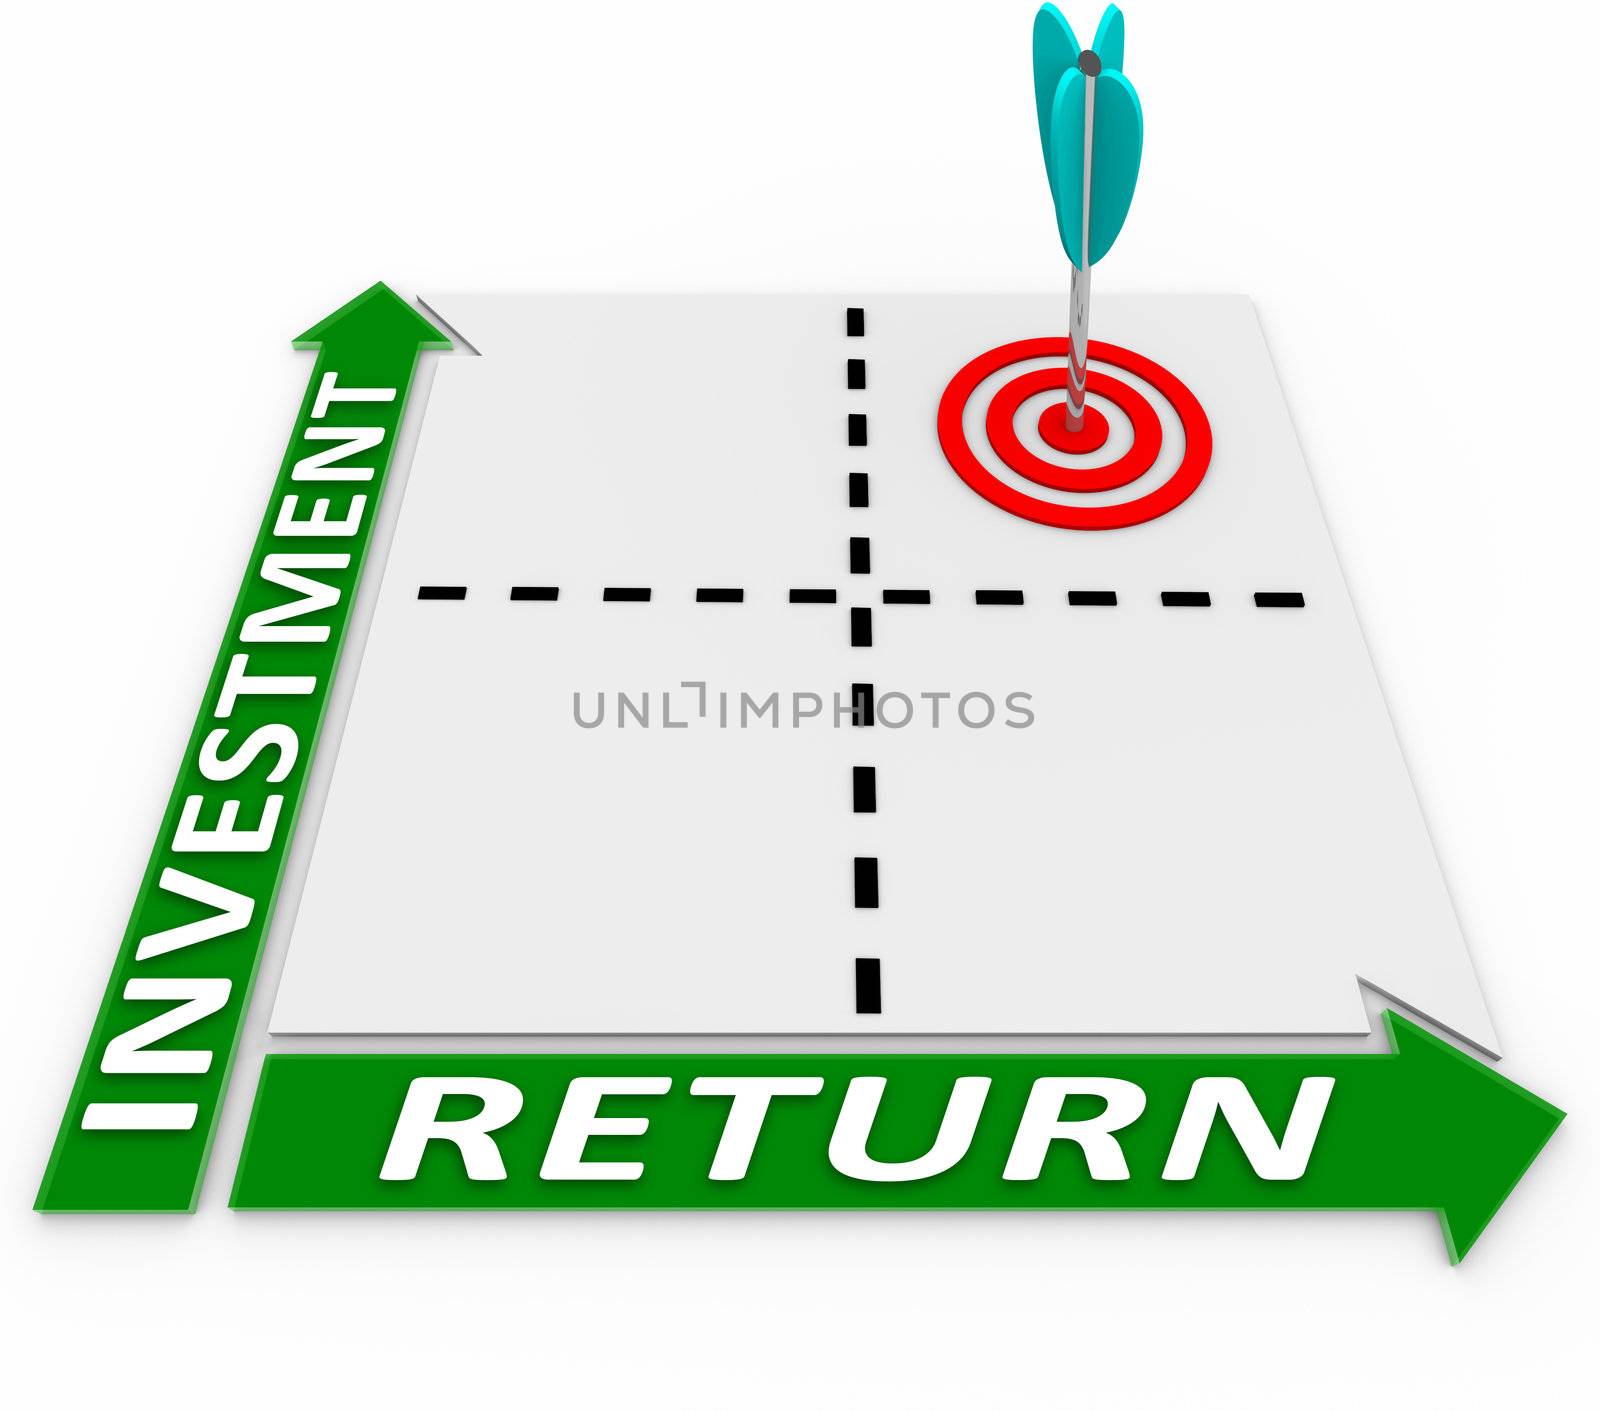 Maximize the return on your investment by increasing the amount you invest and growing the amount of your return or R.O.I.